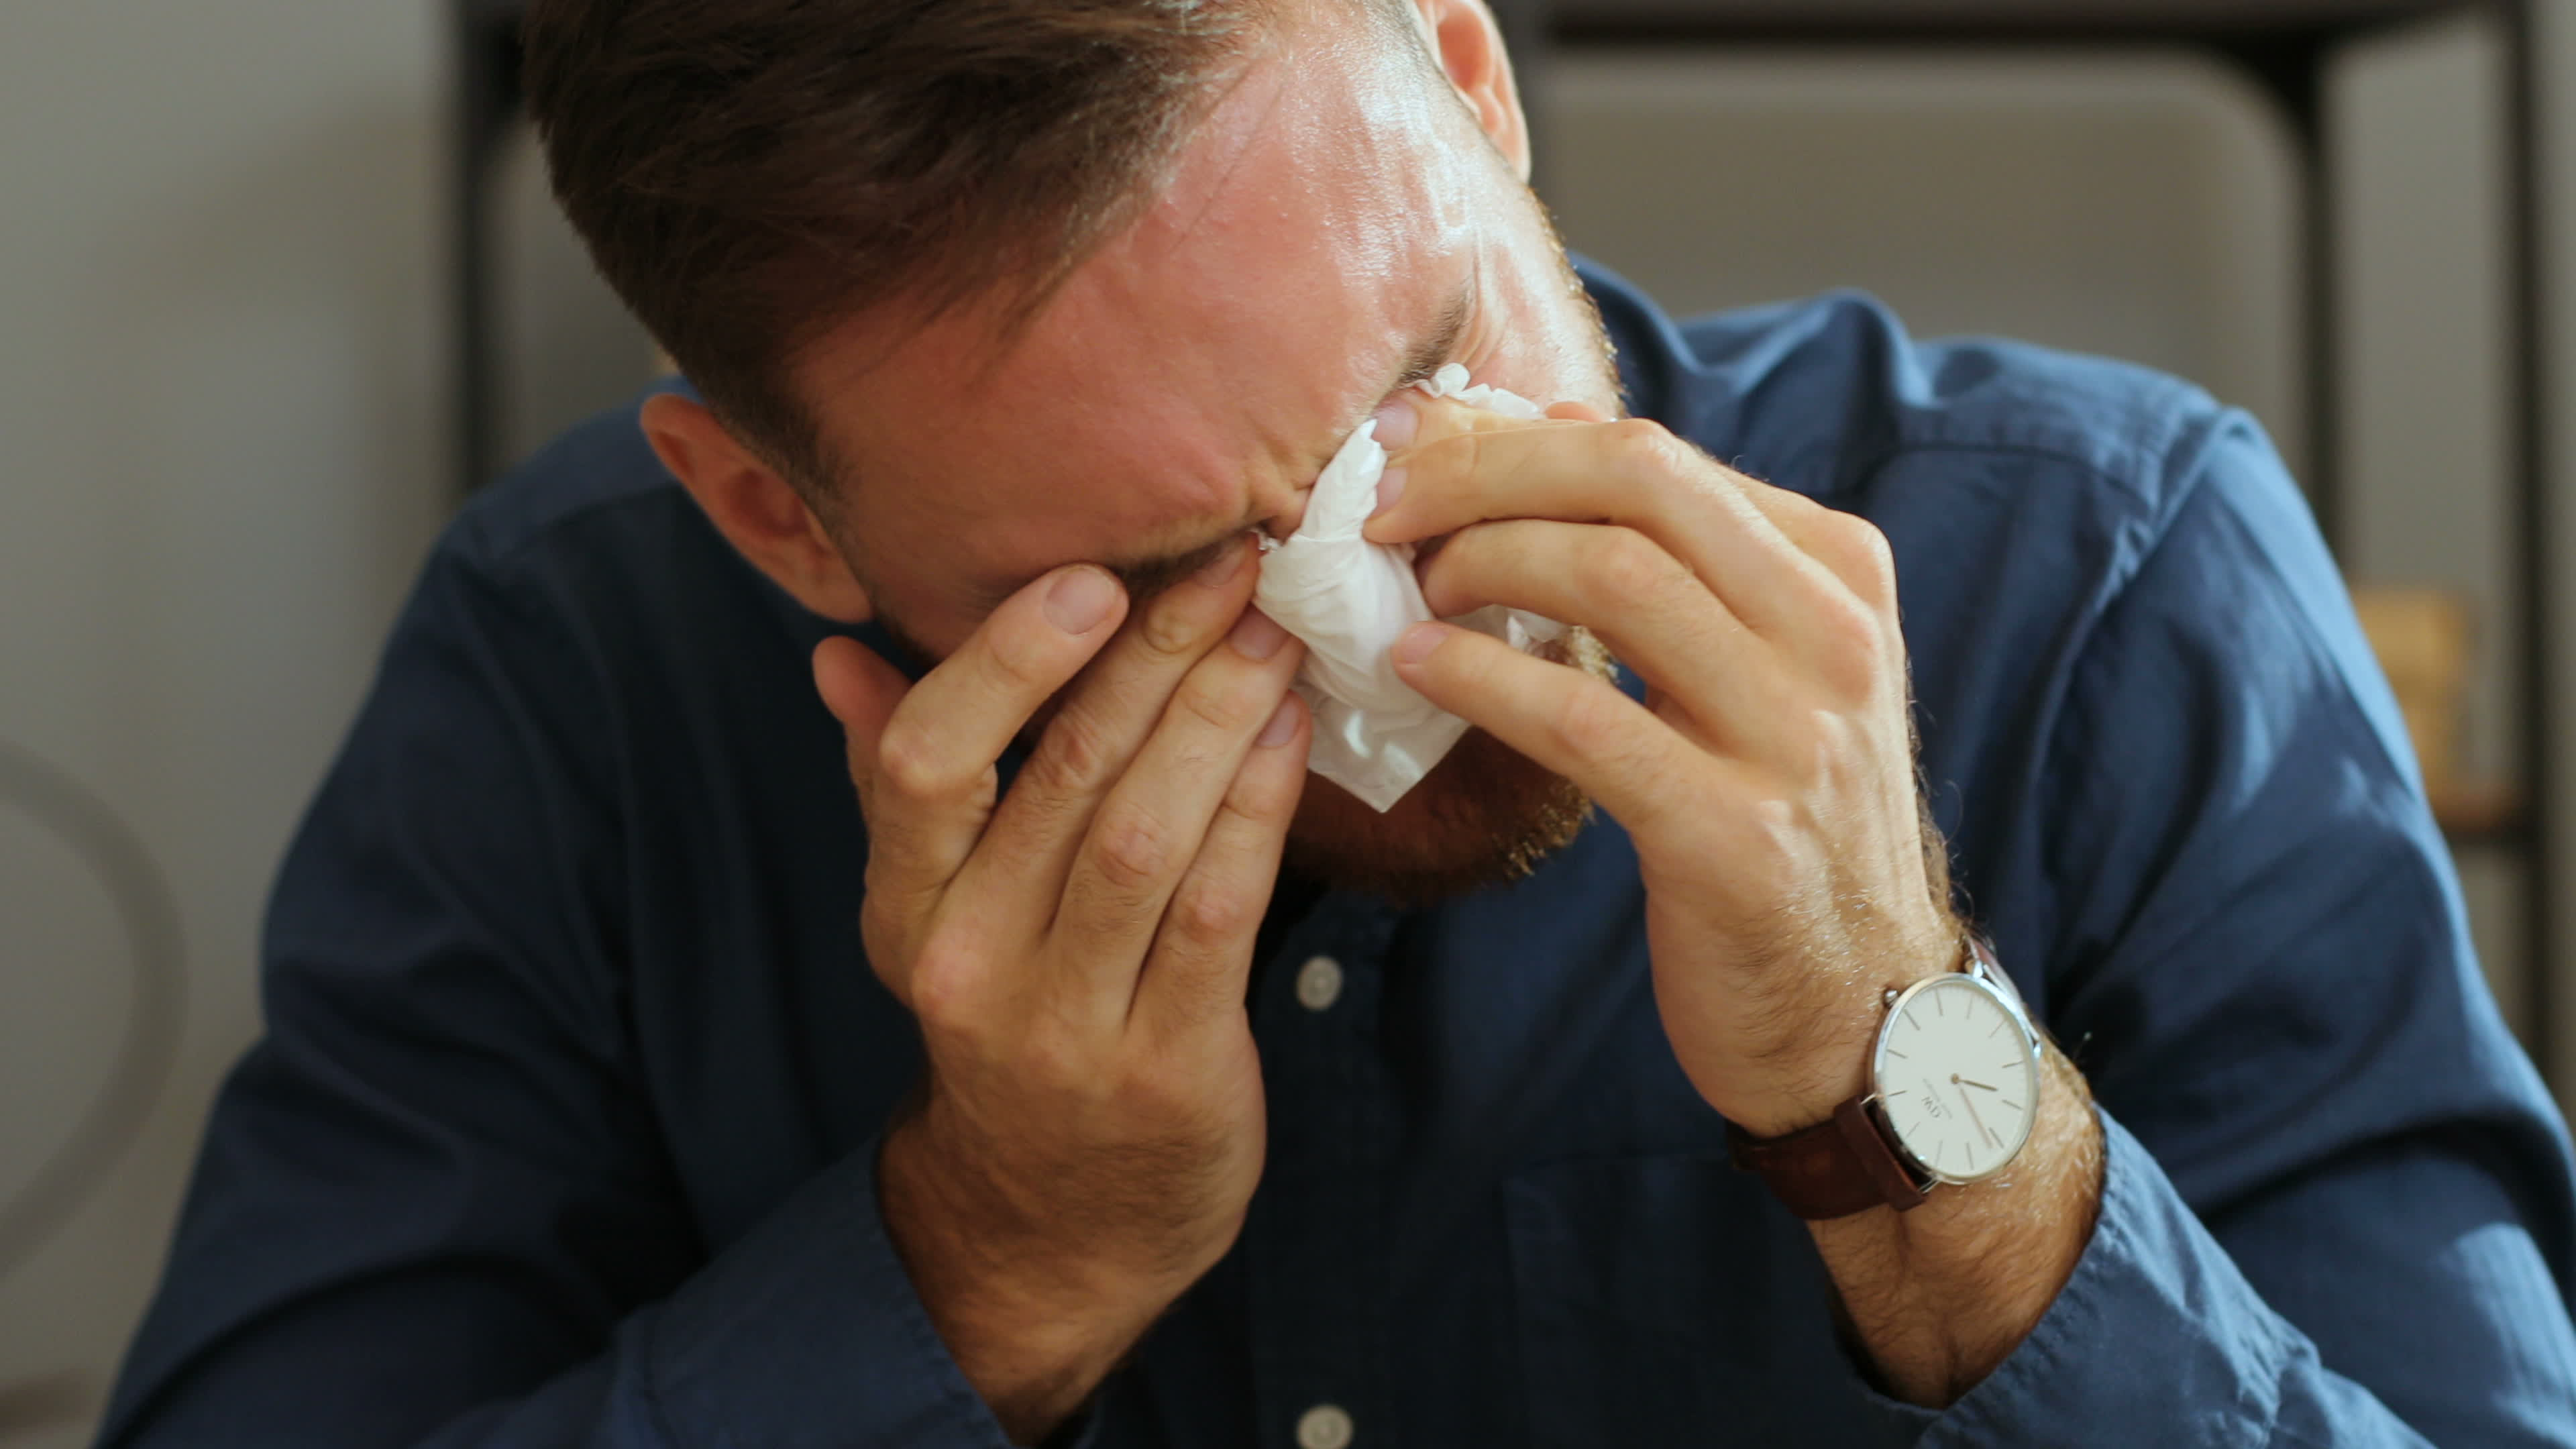 A man wipes his eyes with a napkin while crying | Source: Shutterstock